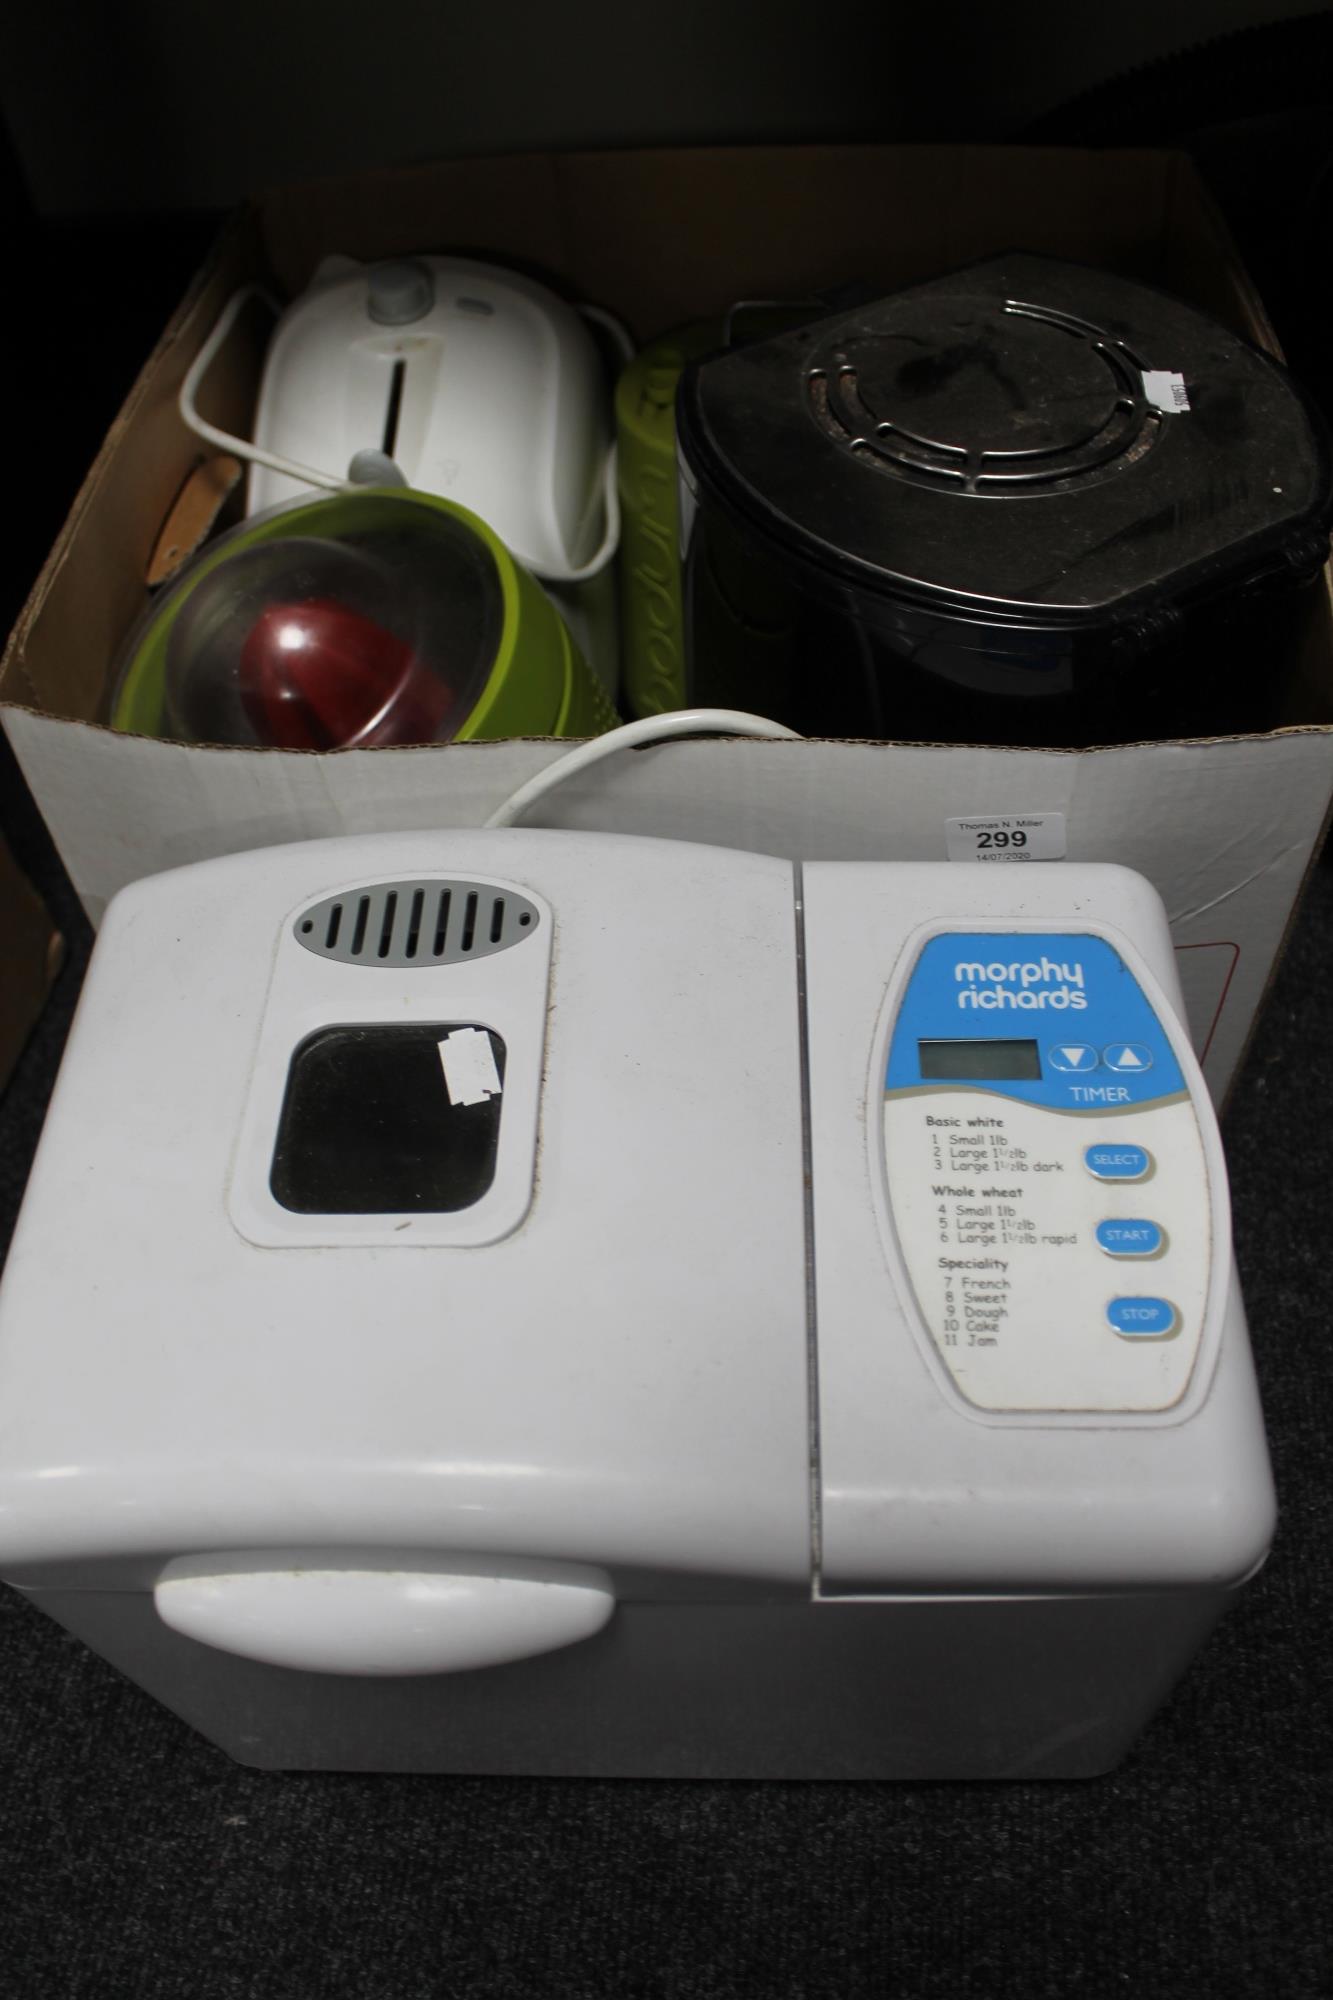 A box of Morphy Richards bread maker,